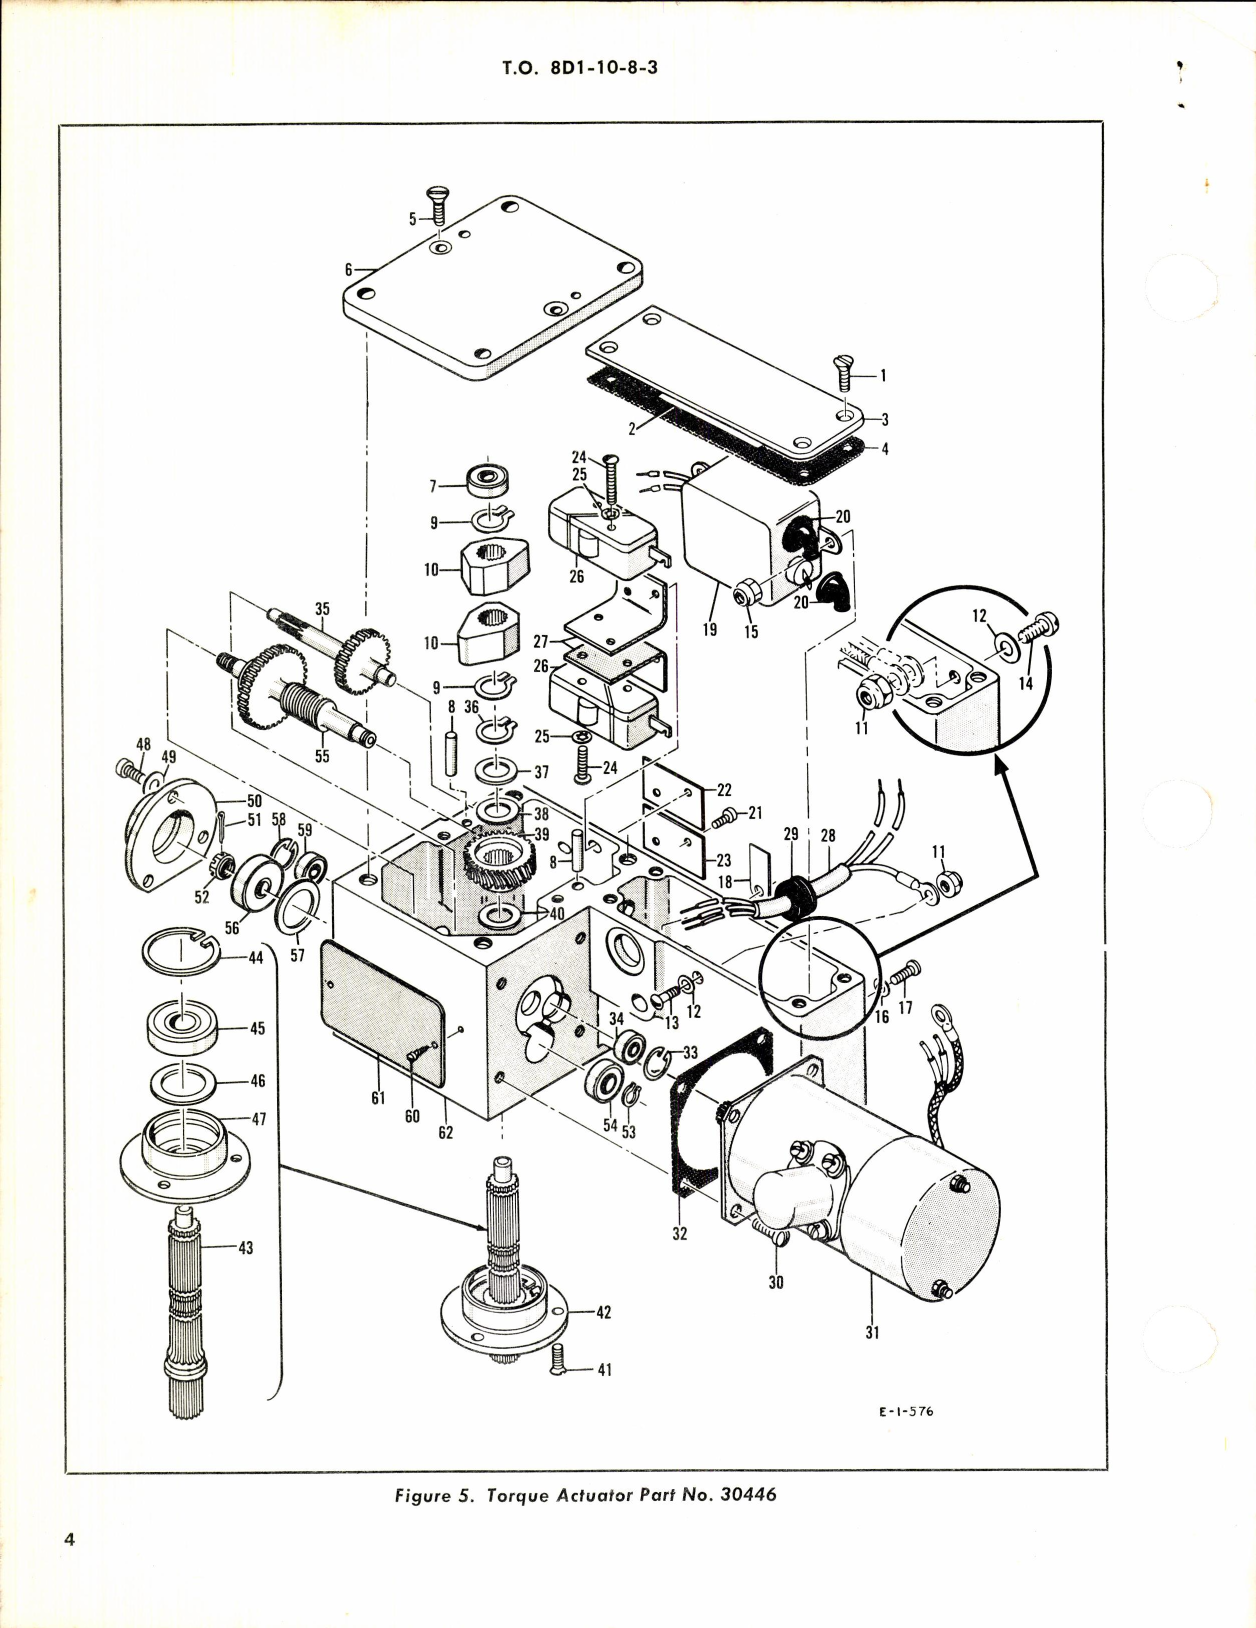 Sample page 4 from AirCorps Library document: Overhaul Instructions with Parts Breakdown Torque Actuator